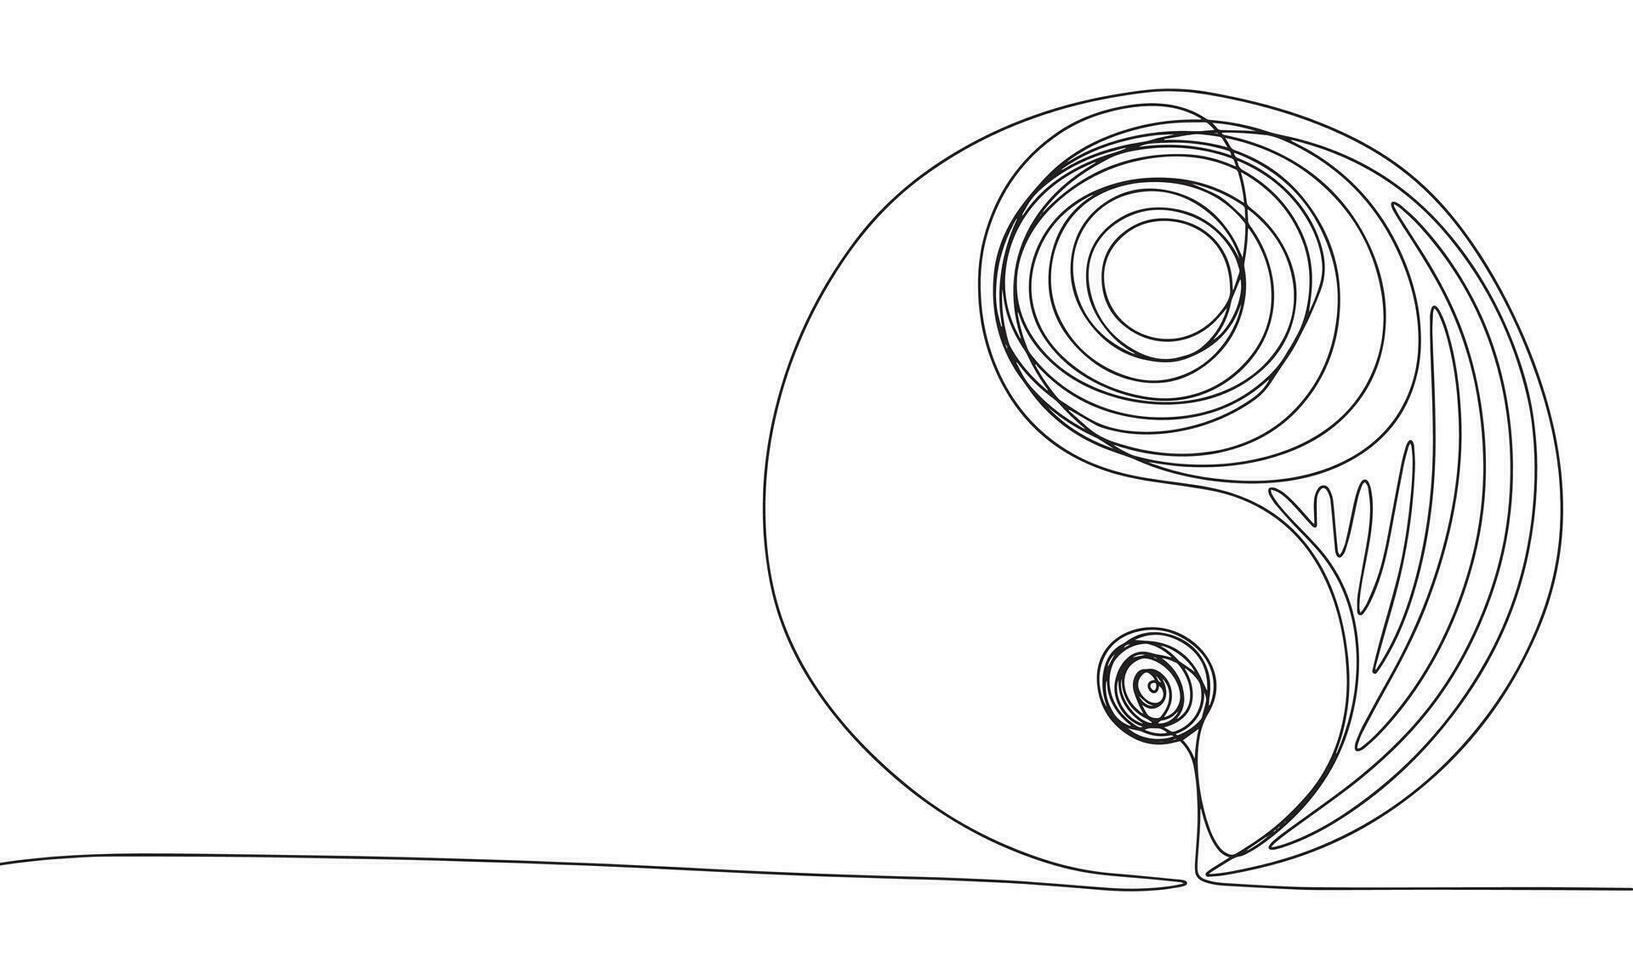 Yin and yang sketch. One line continuous hand drawing. Outline, line art vector illustration.